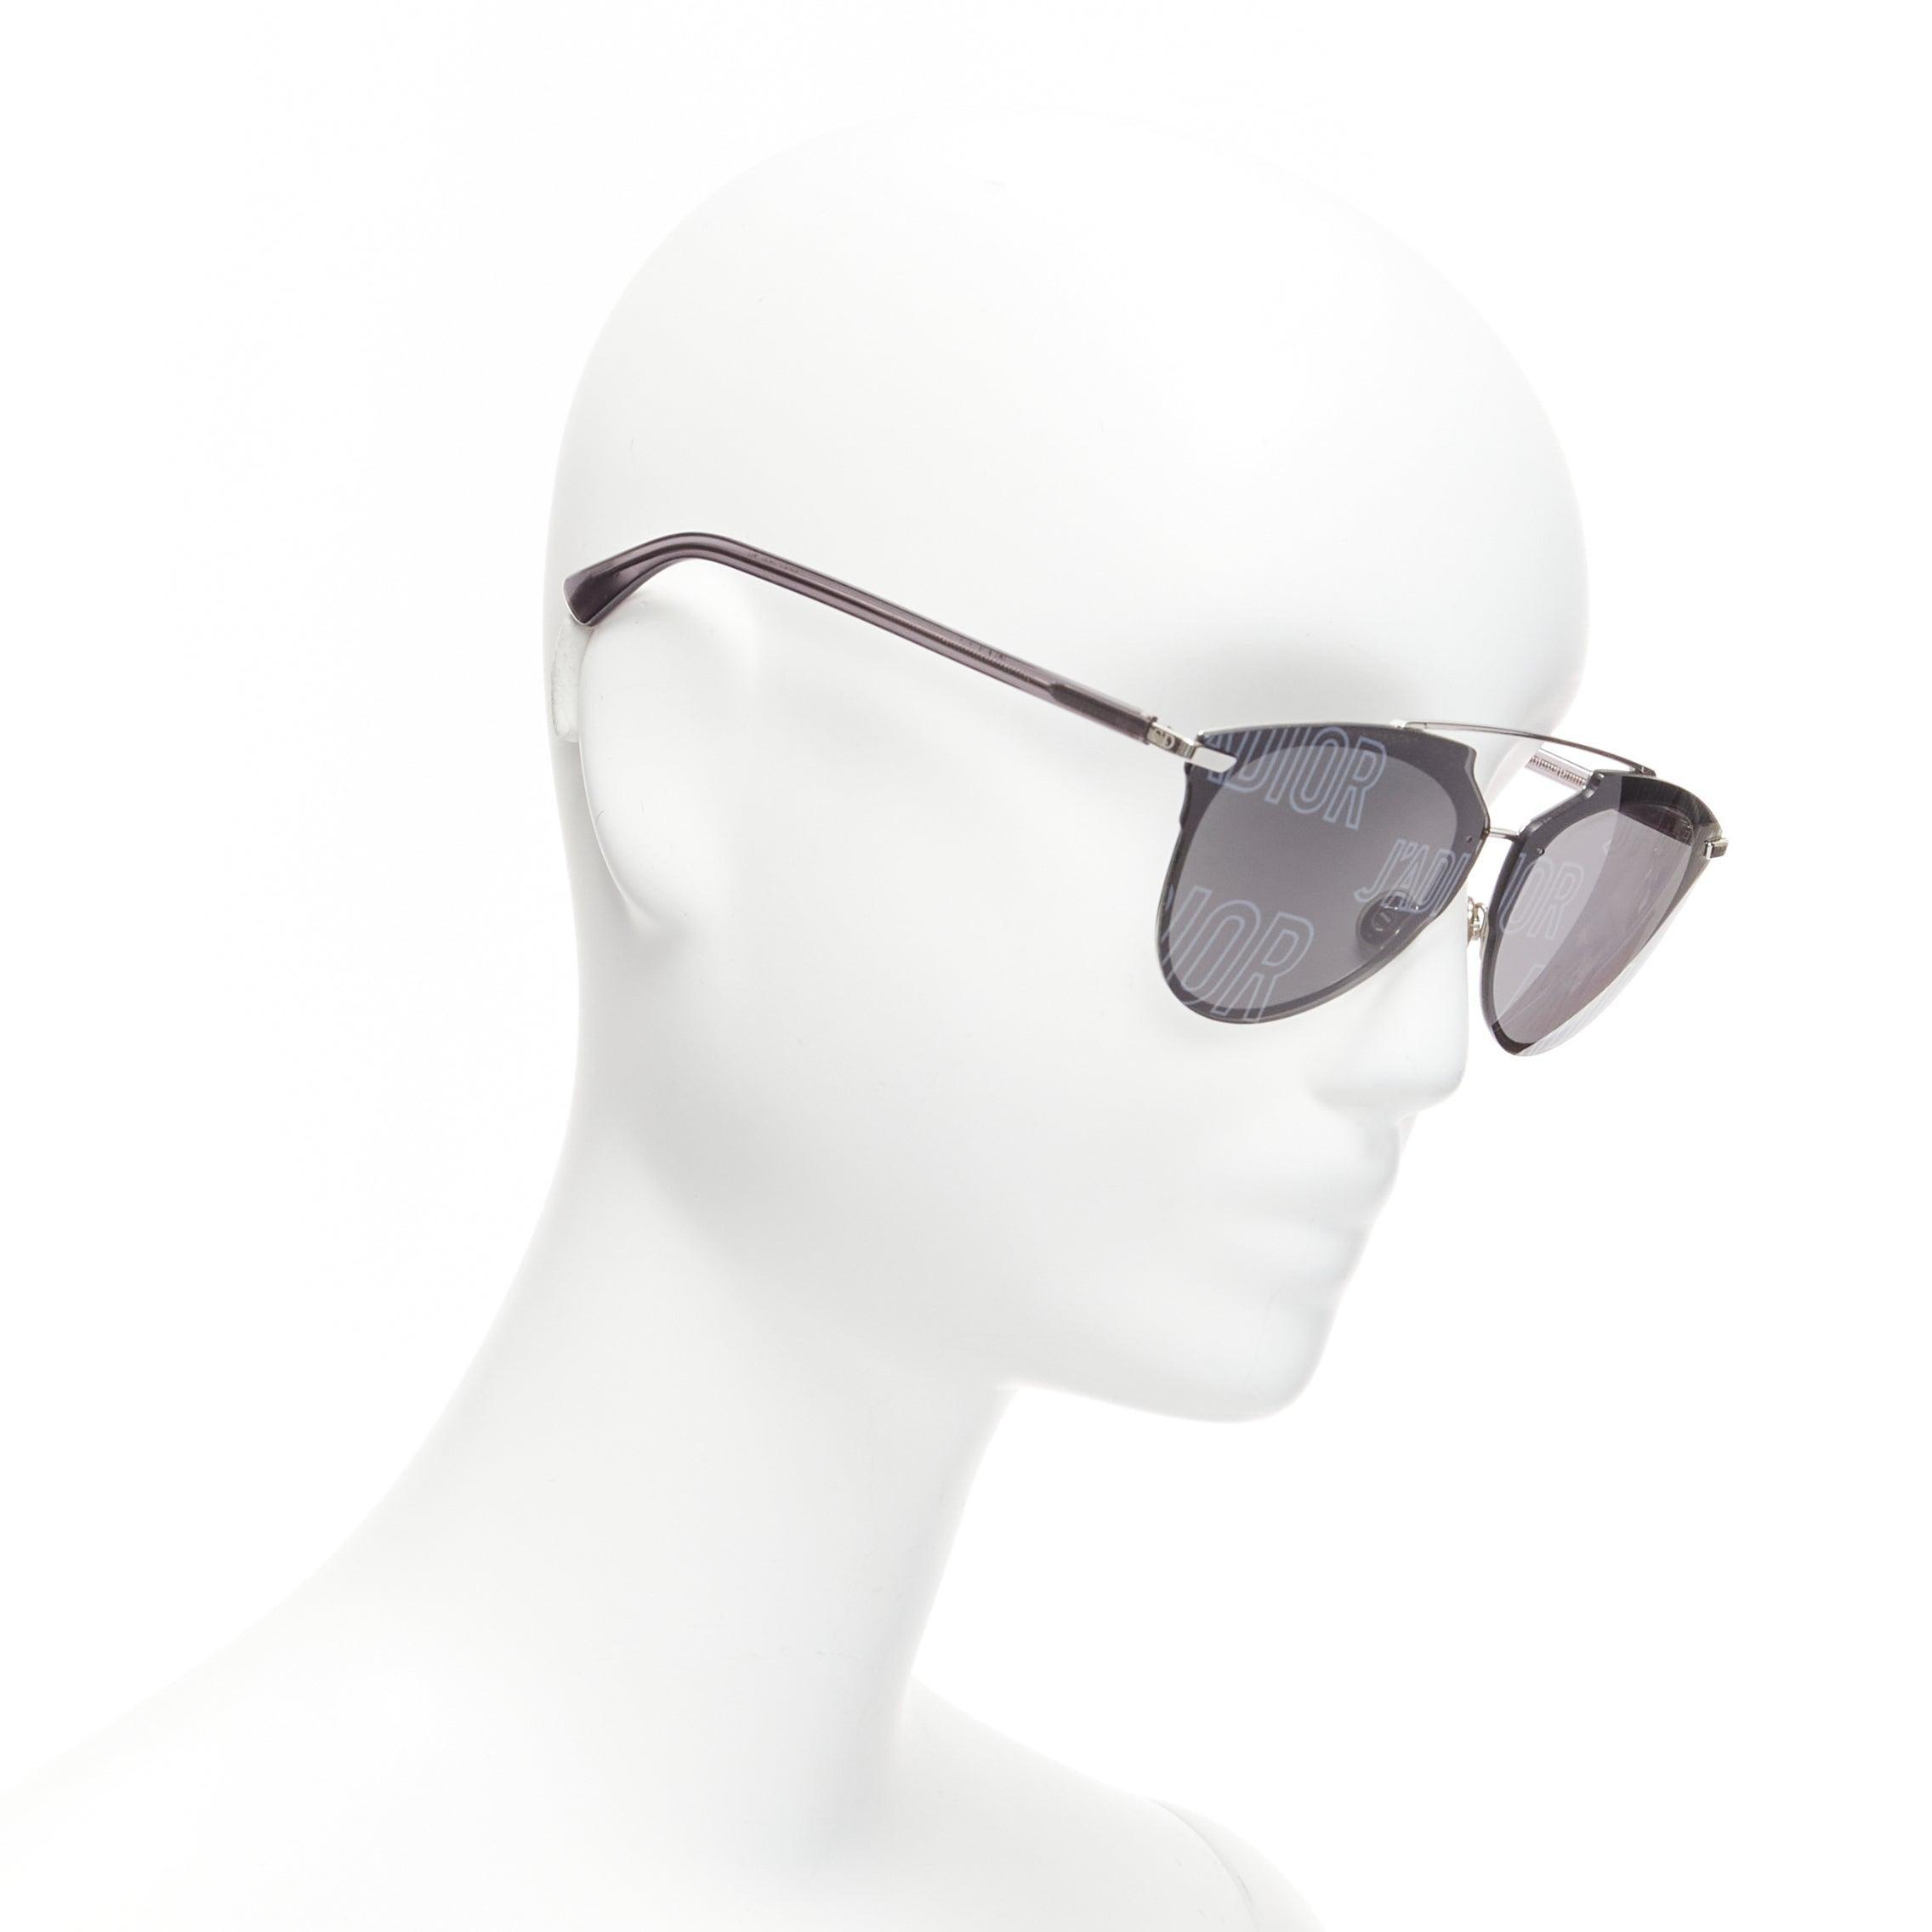 CHRISTIAN DIOR Reflected P J'adior printed black lens sunglasses
Reference: NKLL/A00089
Brand: Dior
Model: Reflected P
Material: Plastic
Color: Black
Pattern: Logomania
Made in: Italy

CONDITION:
Condition: Very good, this item was pre-owned and is